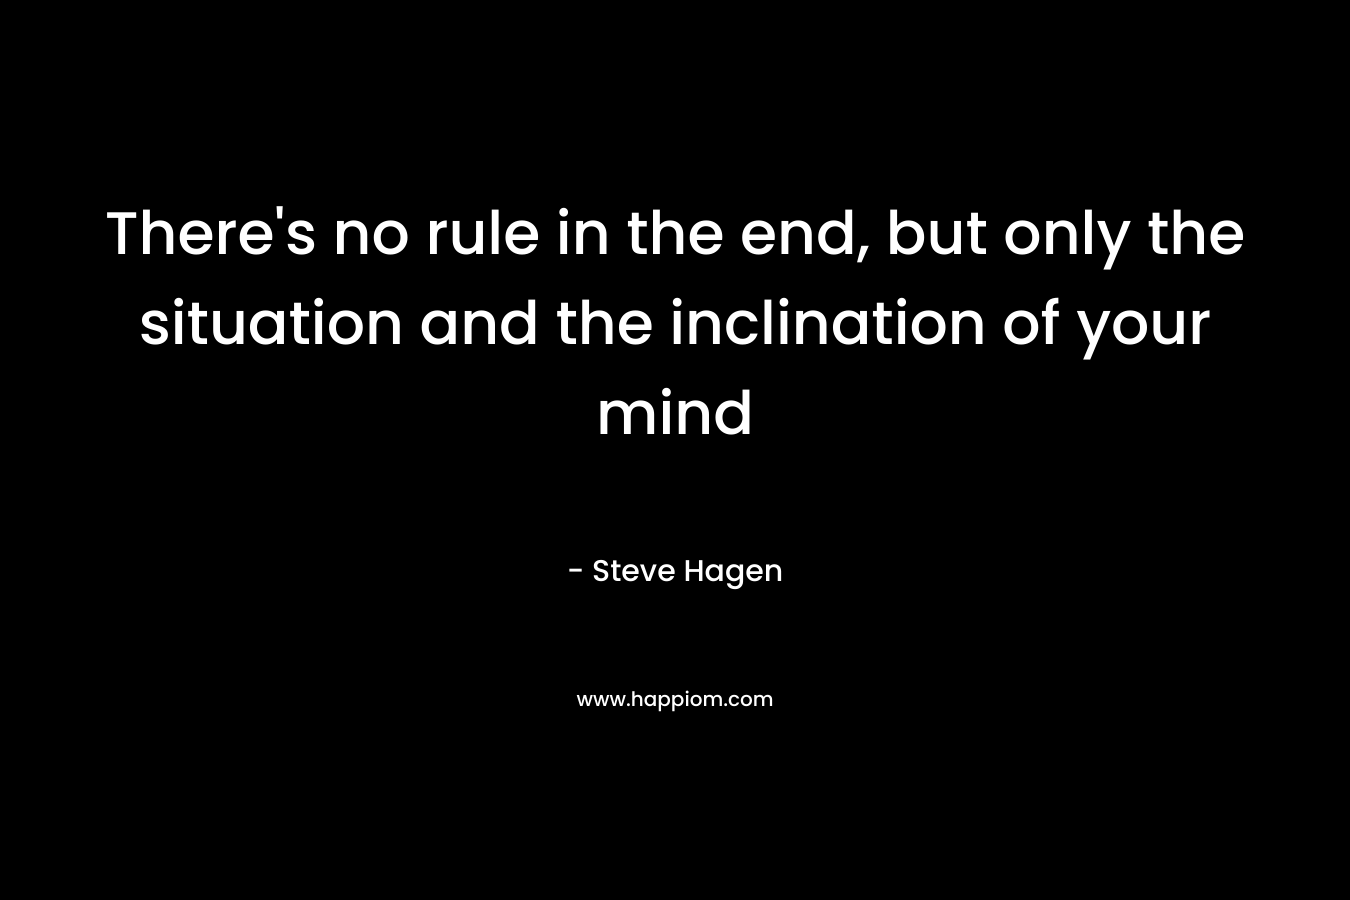 There’s no rule in the end, but only the situation and the inclination of your mind – Steve Hagen